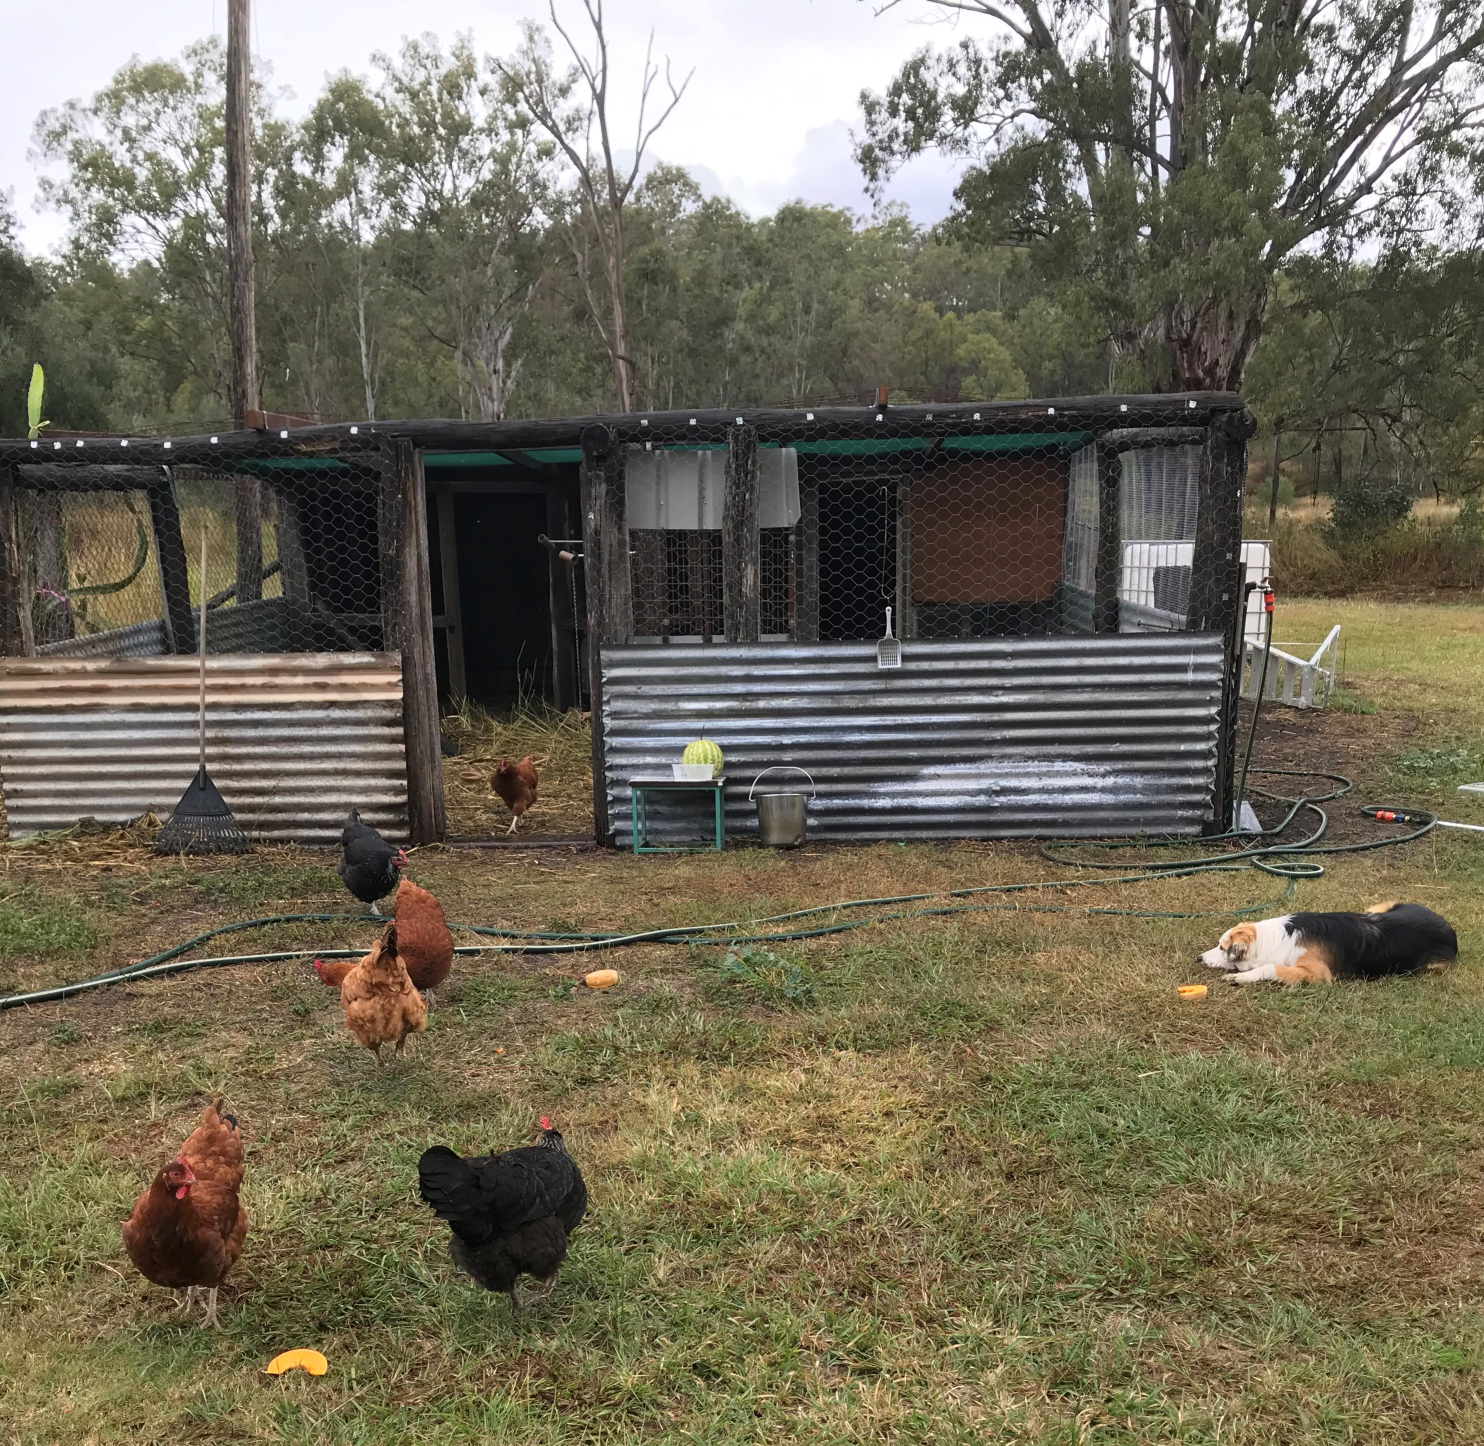 Chickens free ranging outside their new coop